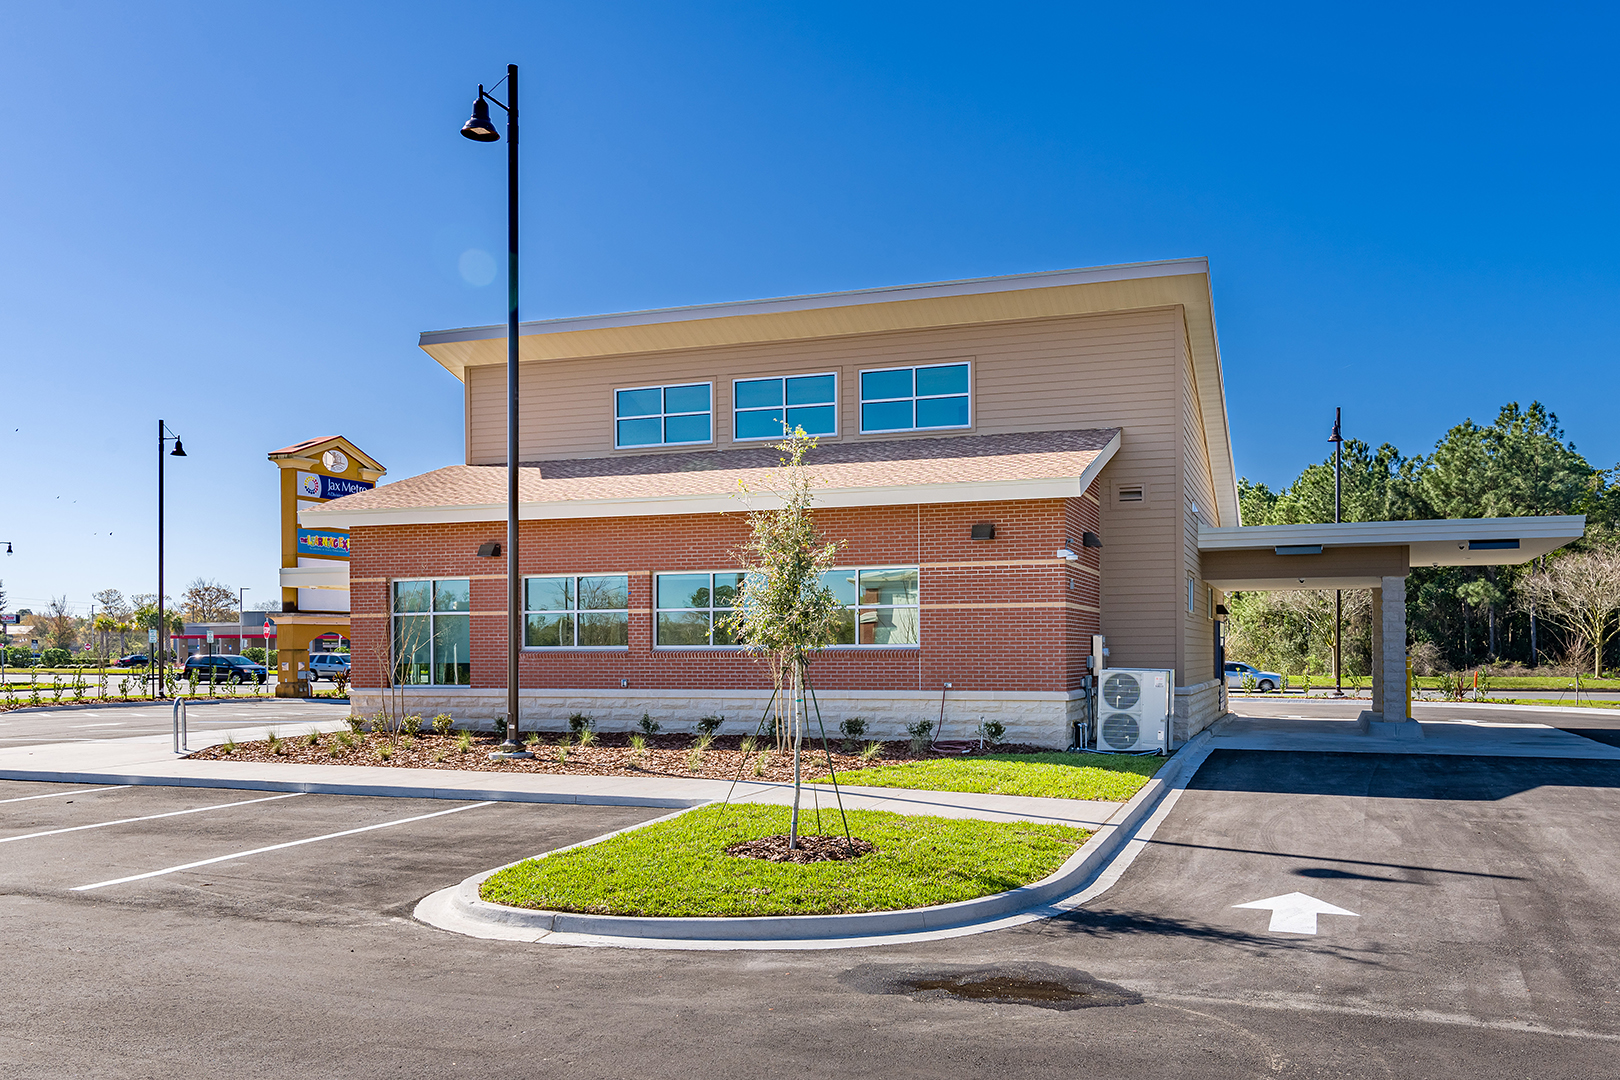 Building Contractor Jacksonville Florida Featured Projects “Self-Help Credit Union River City Branch”